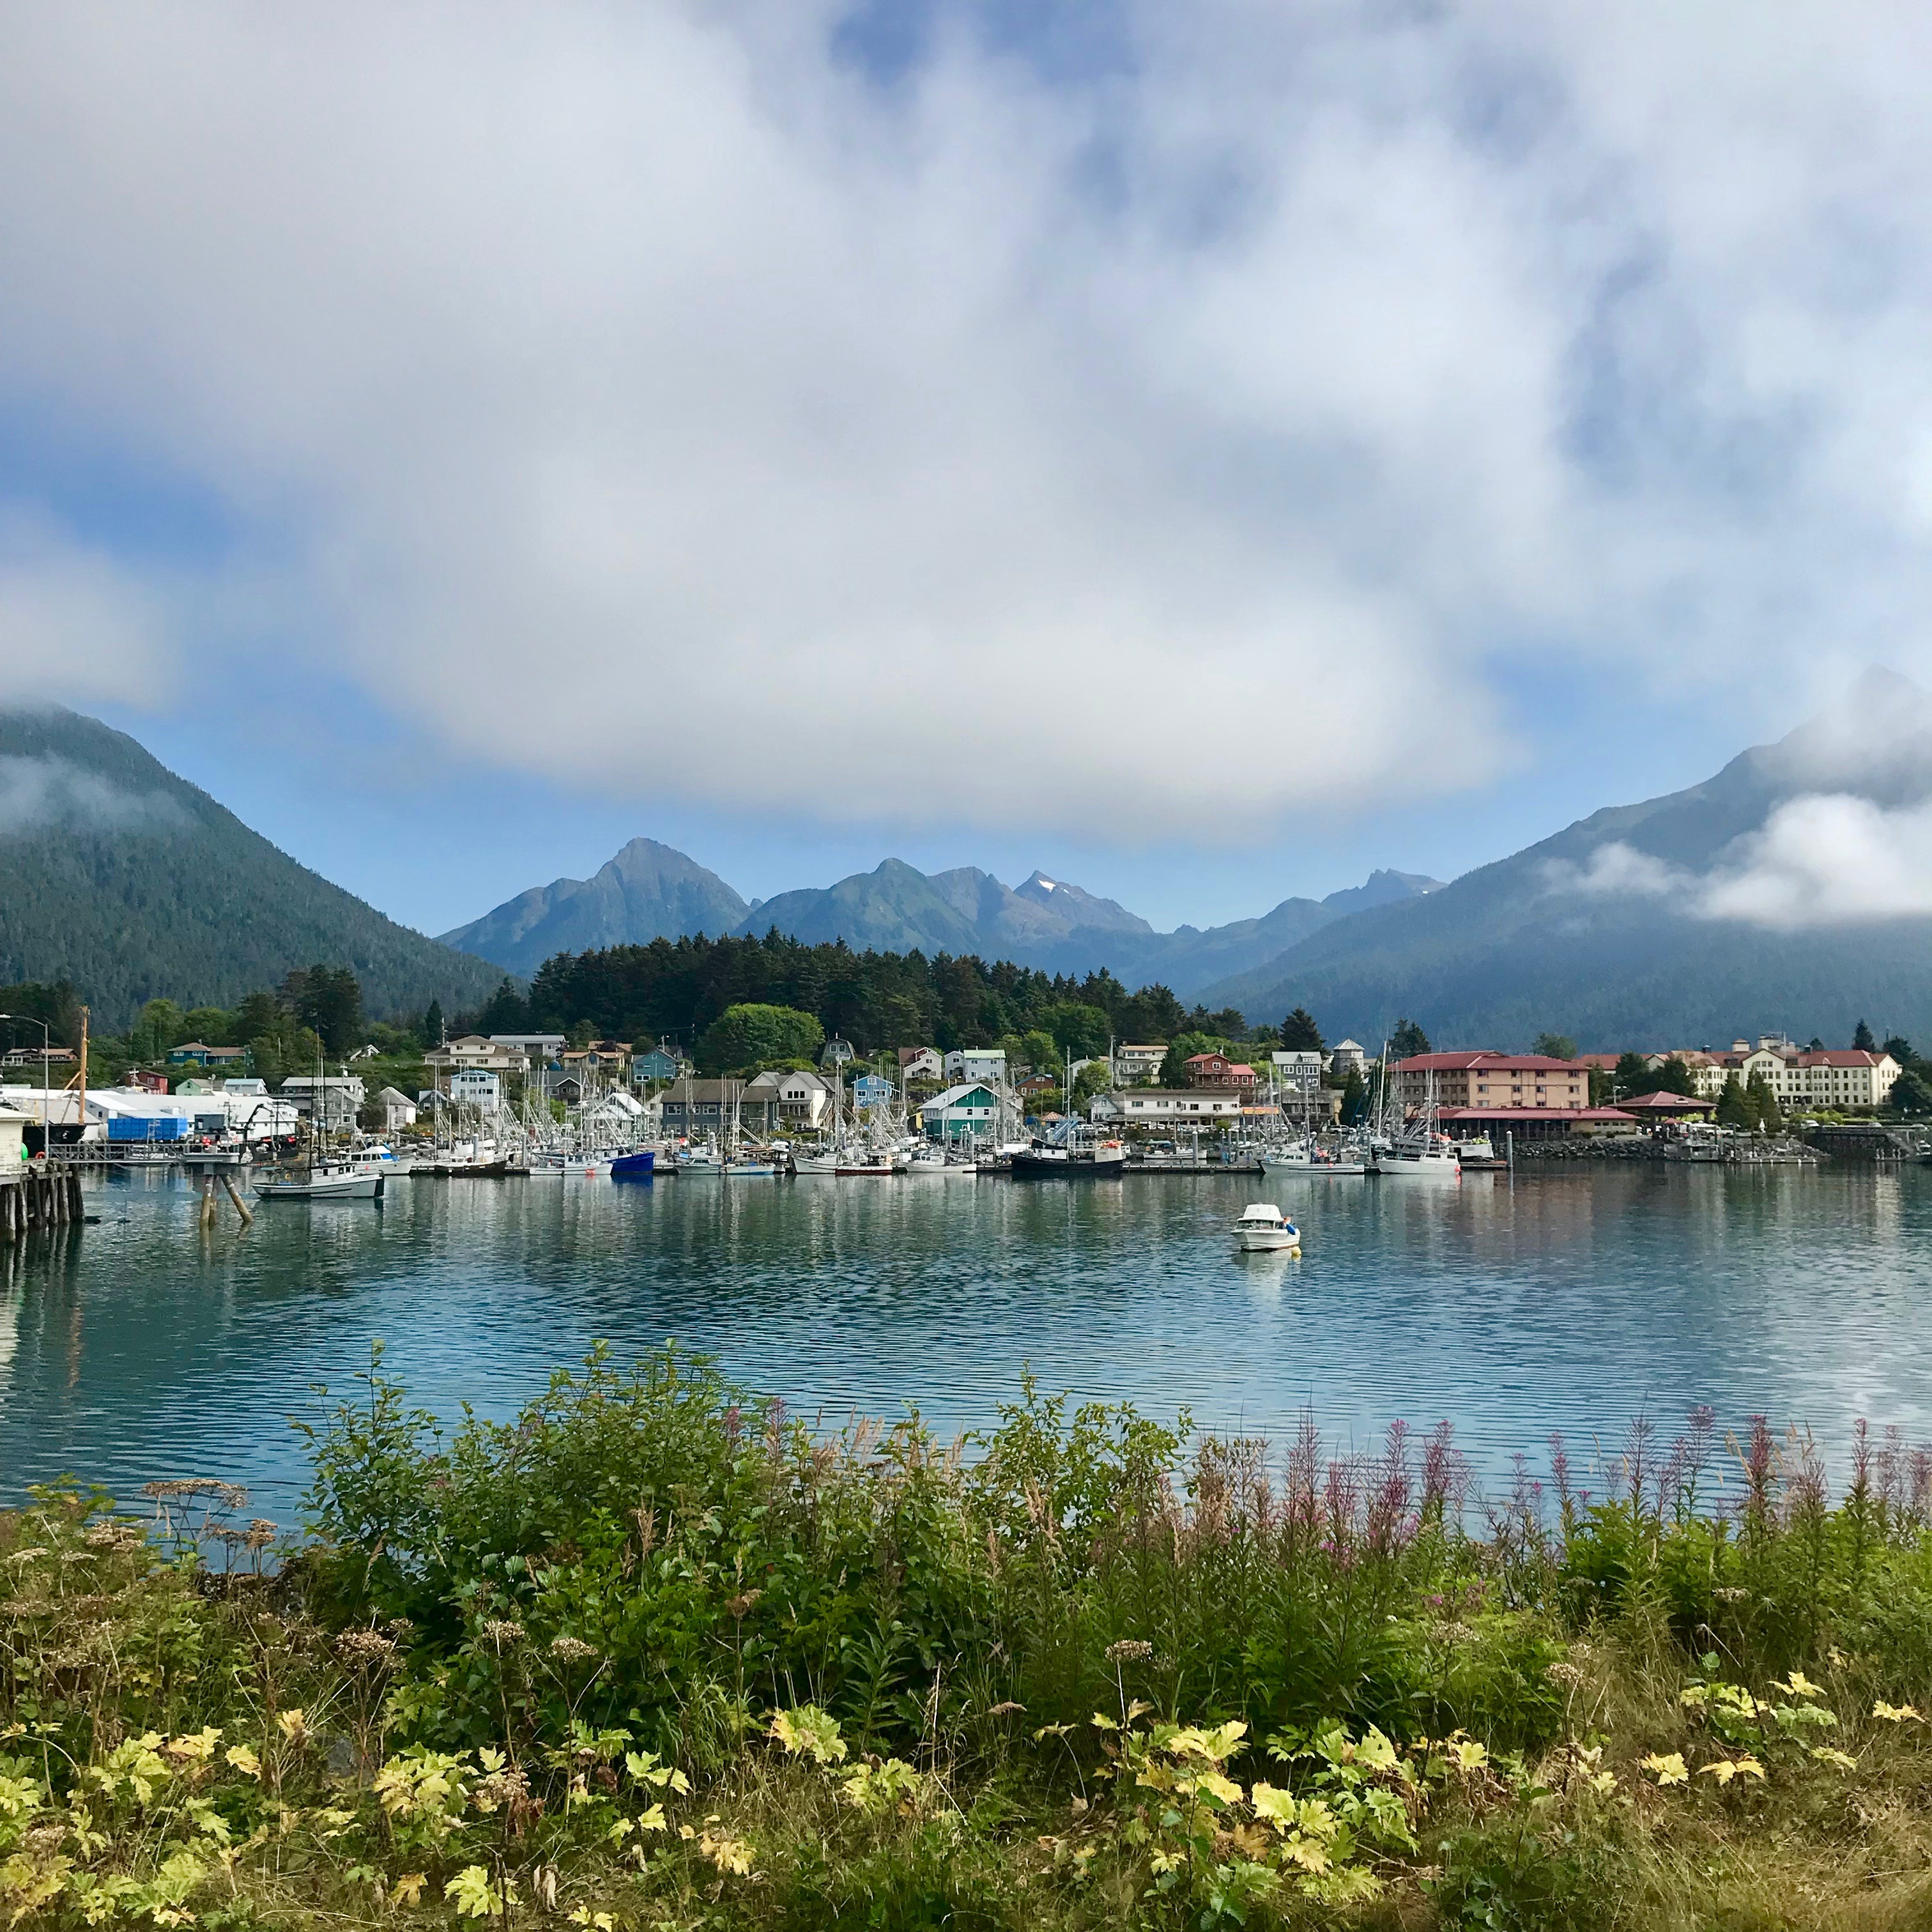 Beautiful scenery on the 2 mile walk from the airport at Sitka, Alaska to the town.